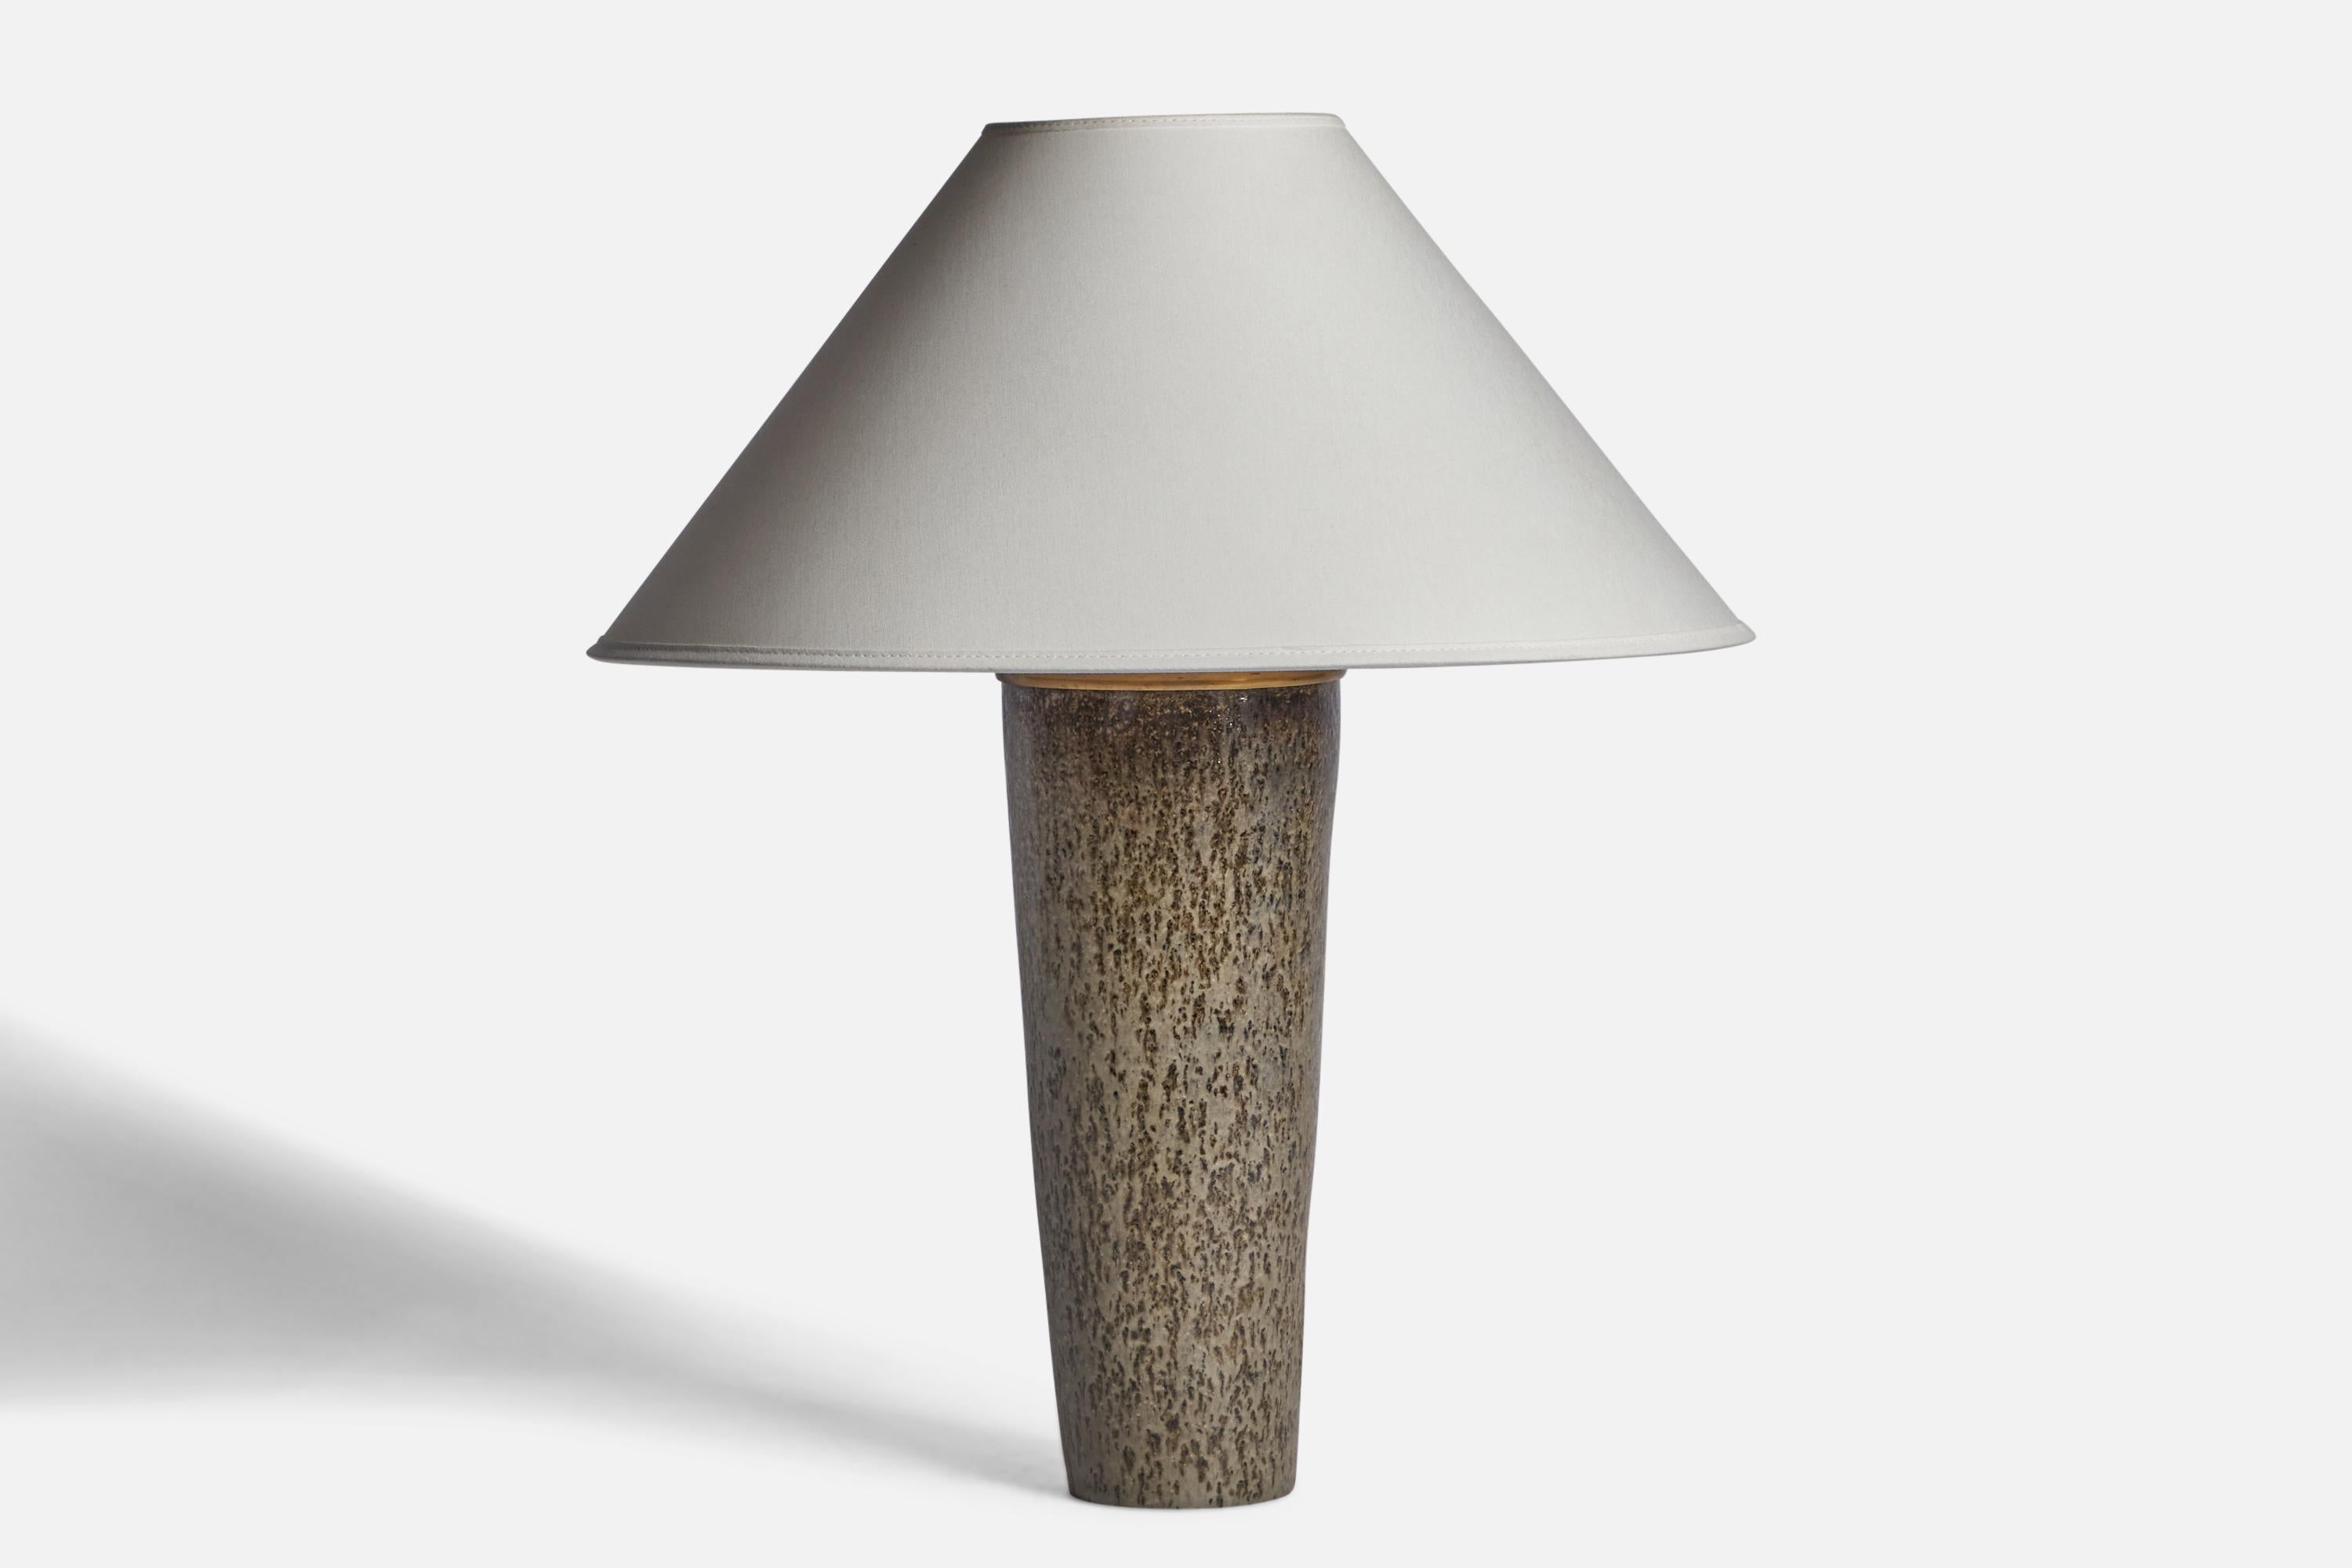 A grey-glazed stoneware and brass table lamp designed by Carl-Harry Stålhane and produced by Rörstrand, Sweden, 1950s.

Dimensions of Lamp (inches): 14.75” H x 5” Diameter
Dimensions of Shade (inches): 4.5” Top Diameter x 16” Bottom Diameter x 7.25”